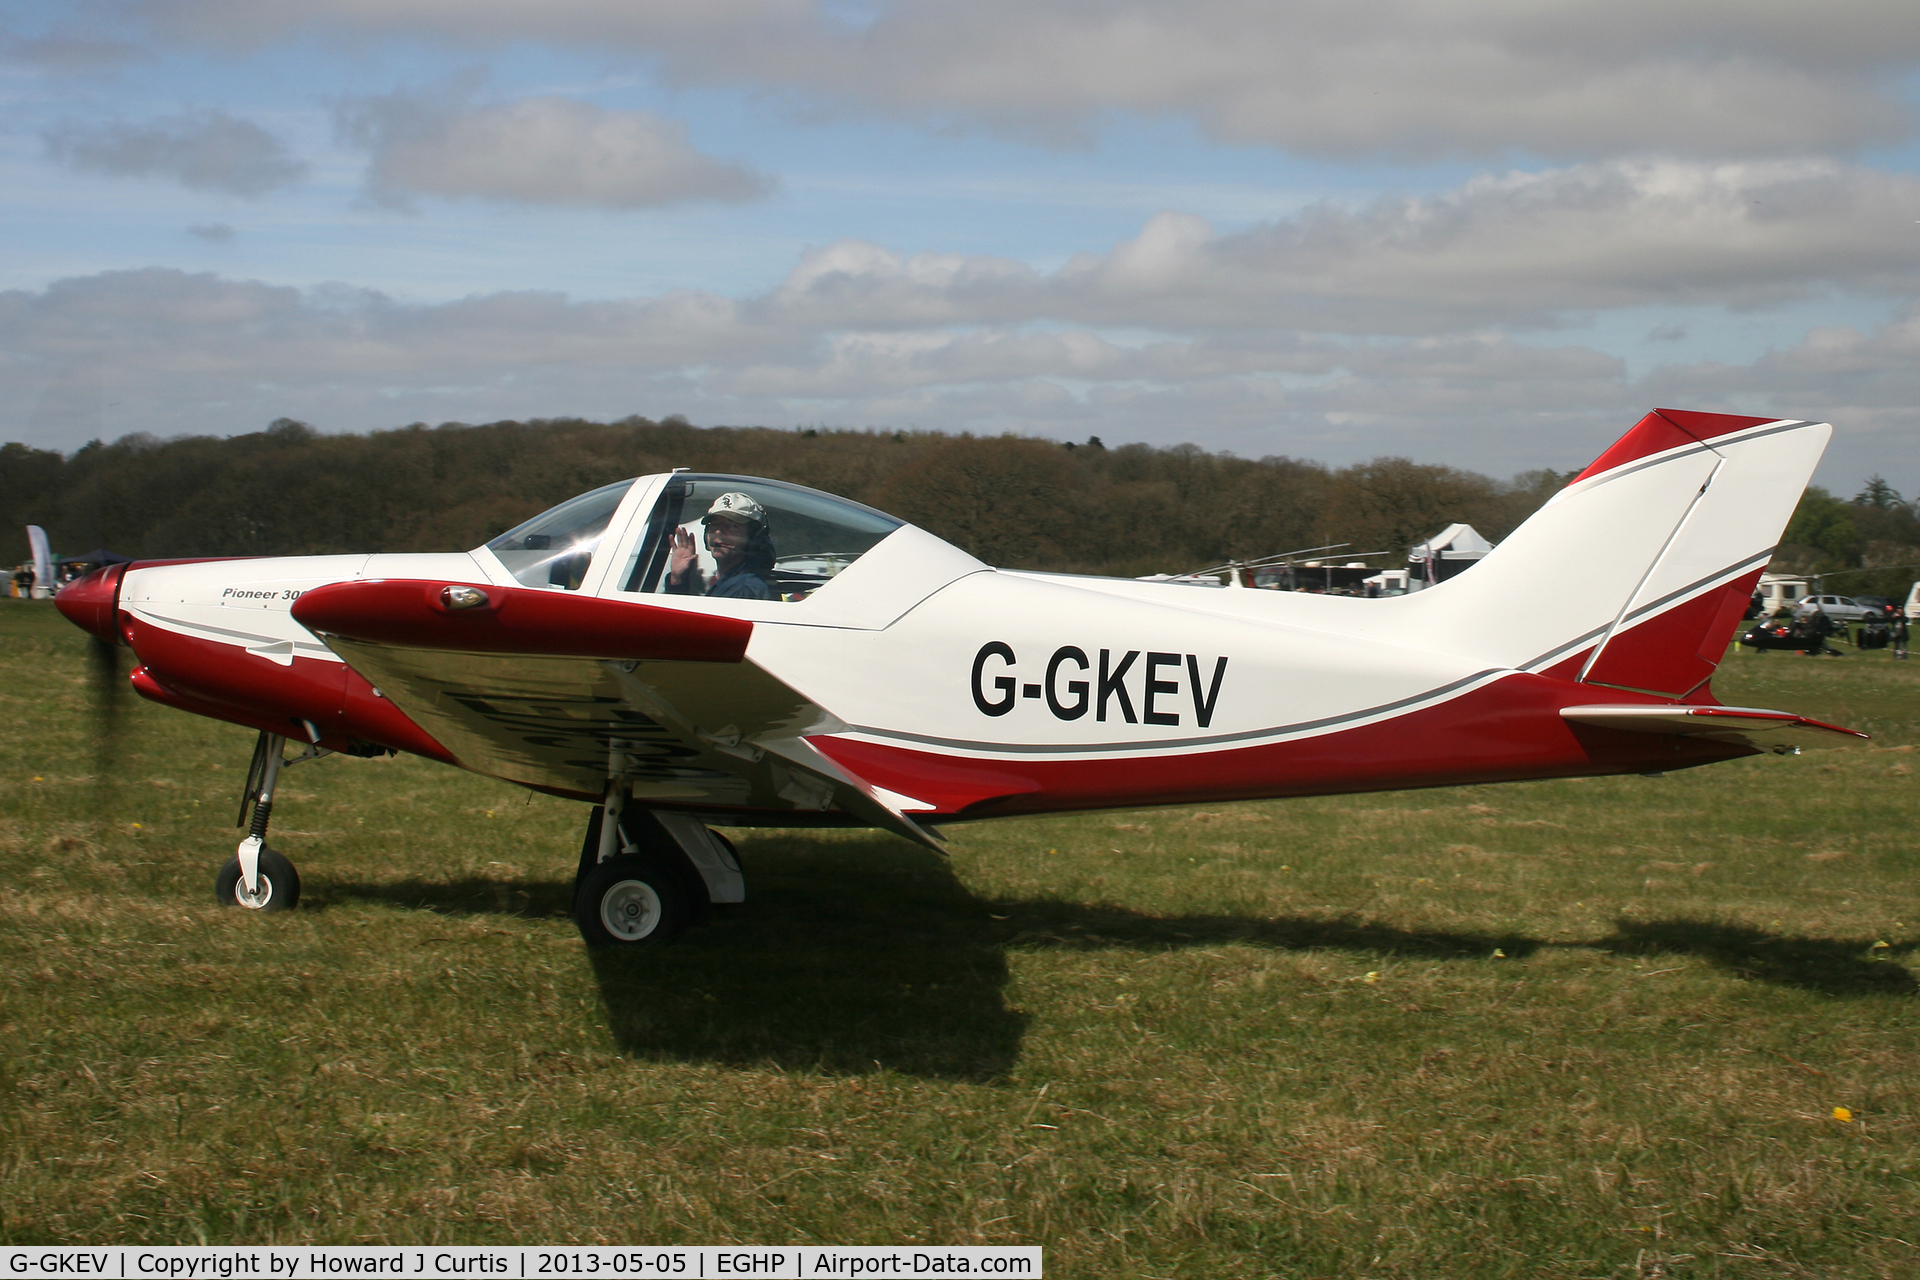 G-GKEV, 2010 Alpi Aviation Pioneer 300 Hawk C/N LAA 330A-14965, Privately owned. At the Microlight Trade Fair.